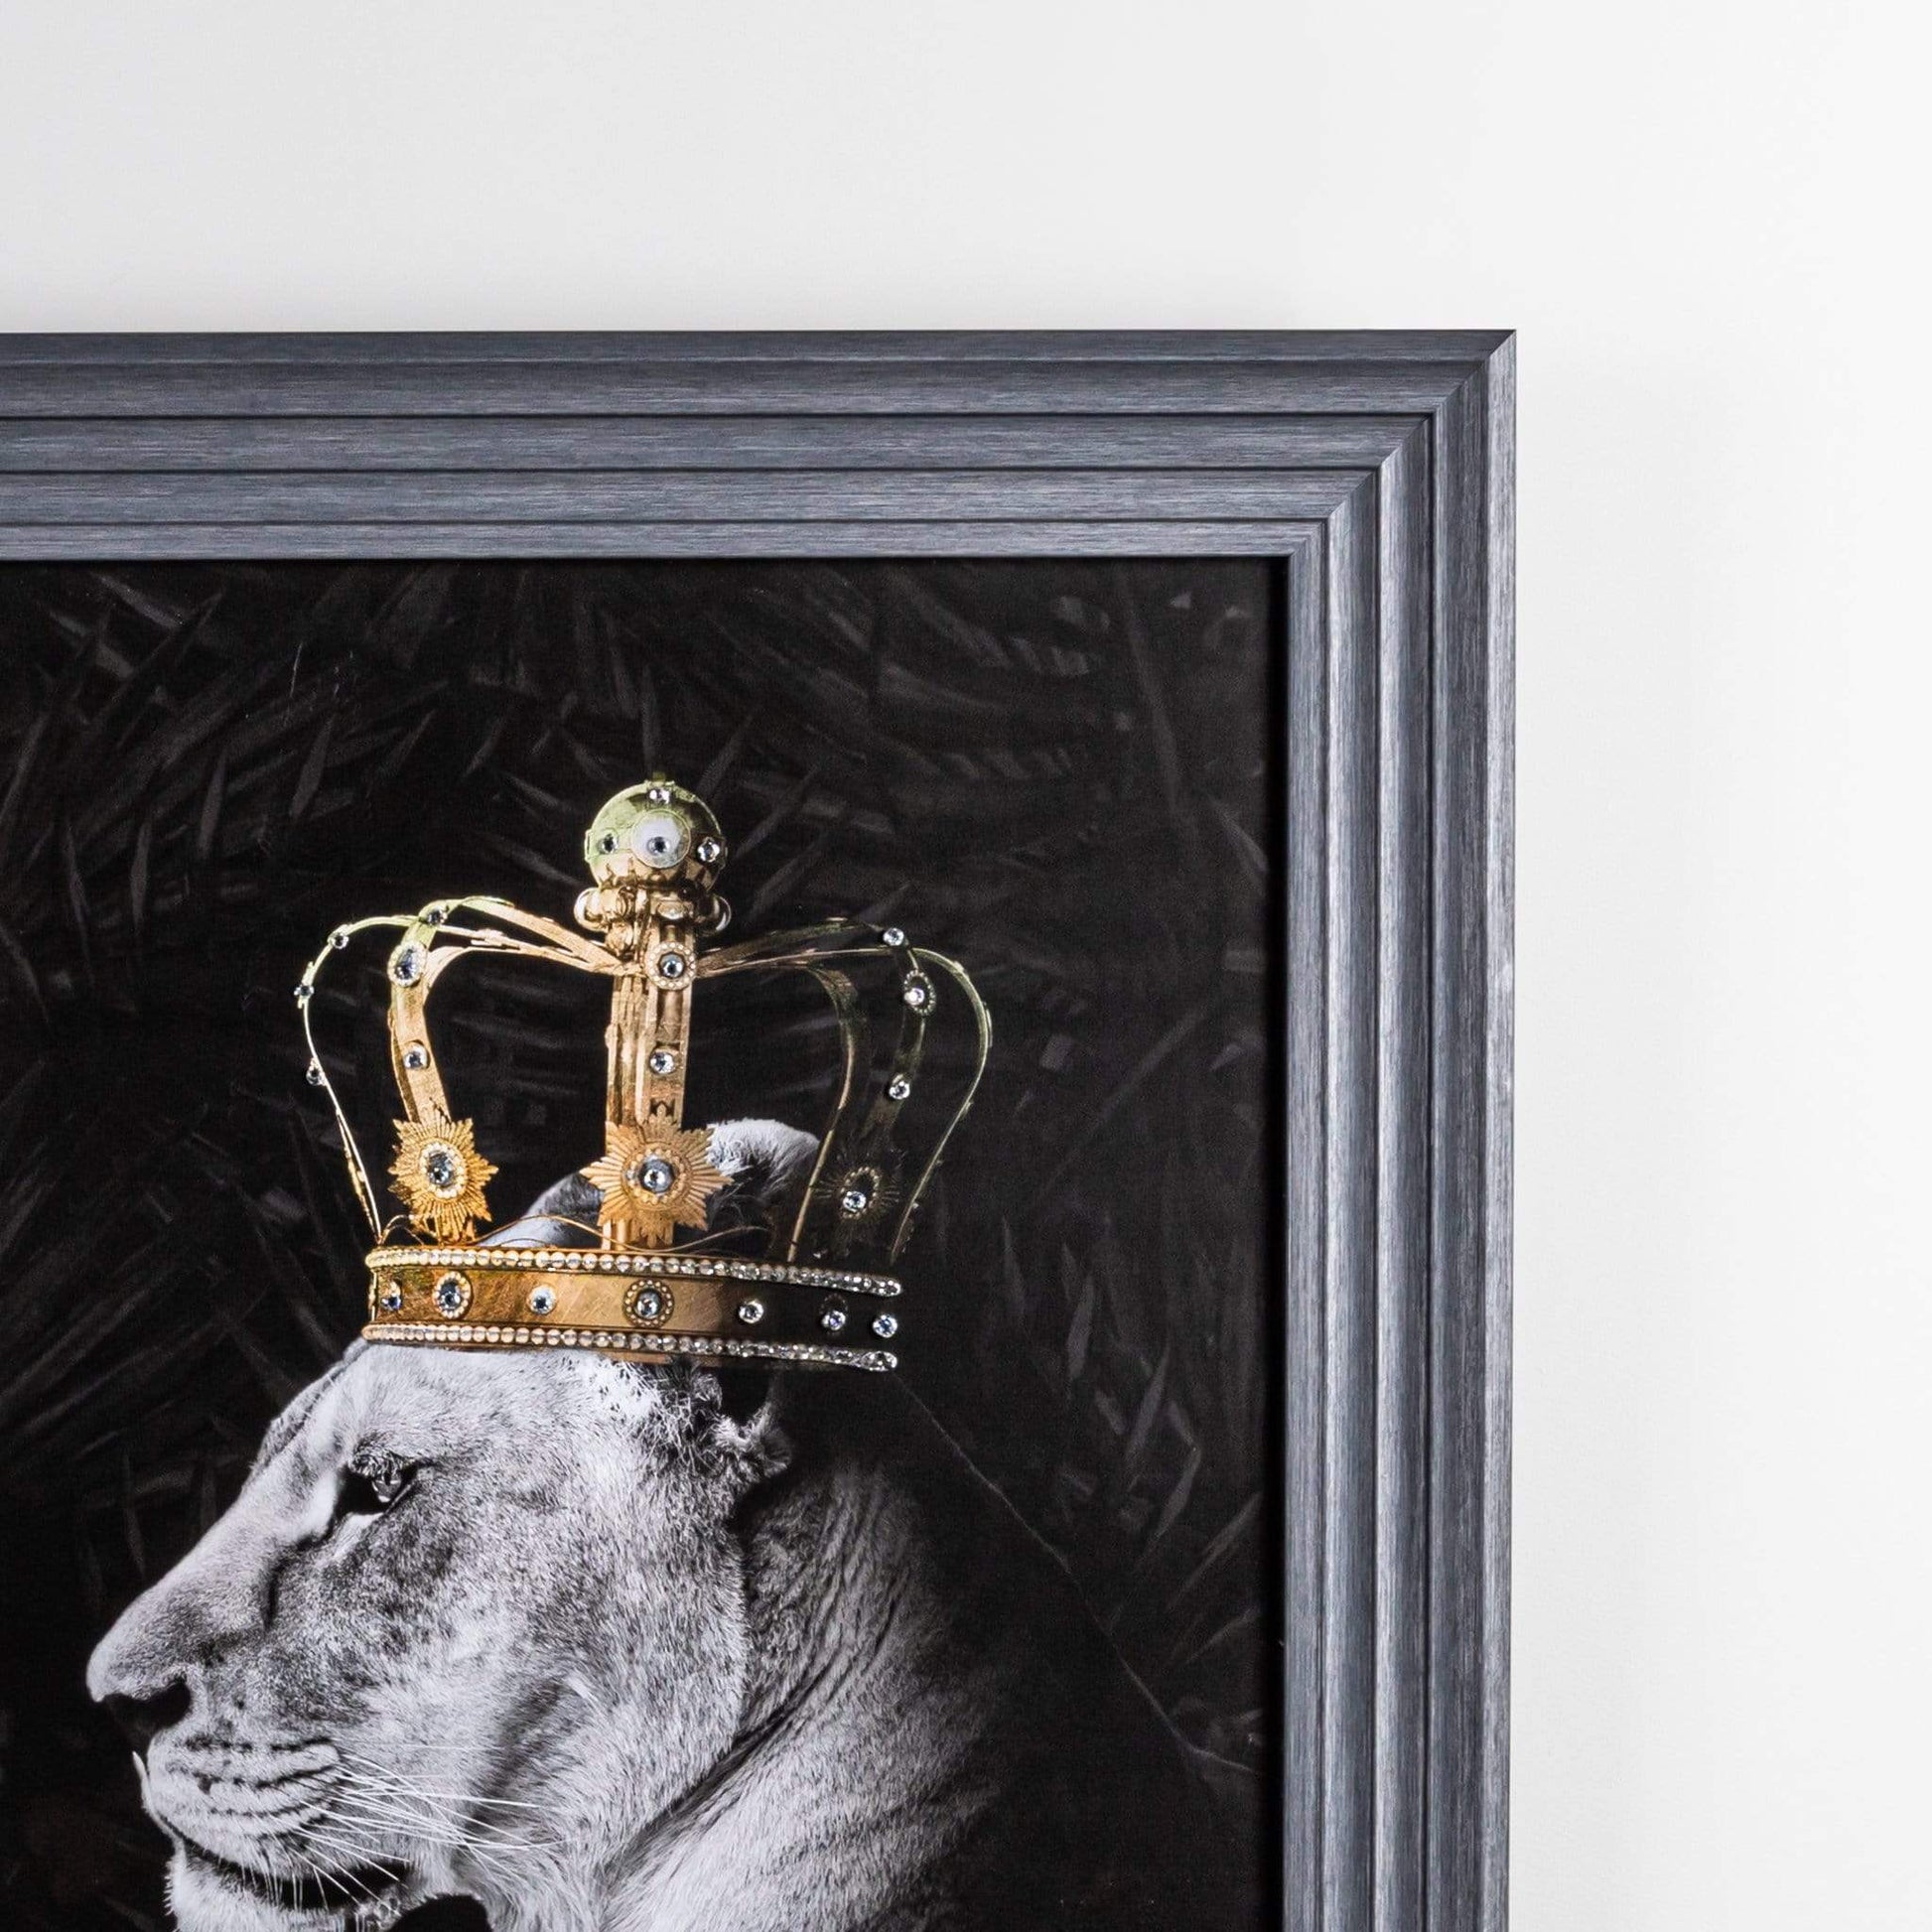 Pictures  -  Lion And Lioness Picture And Frame  -  50152112